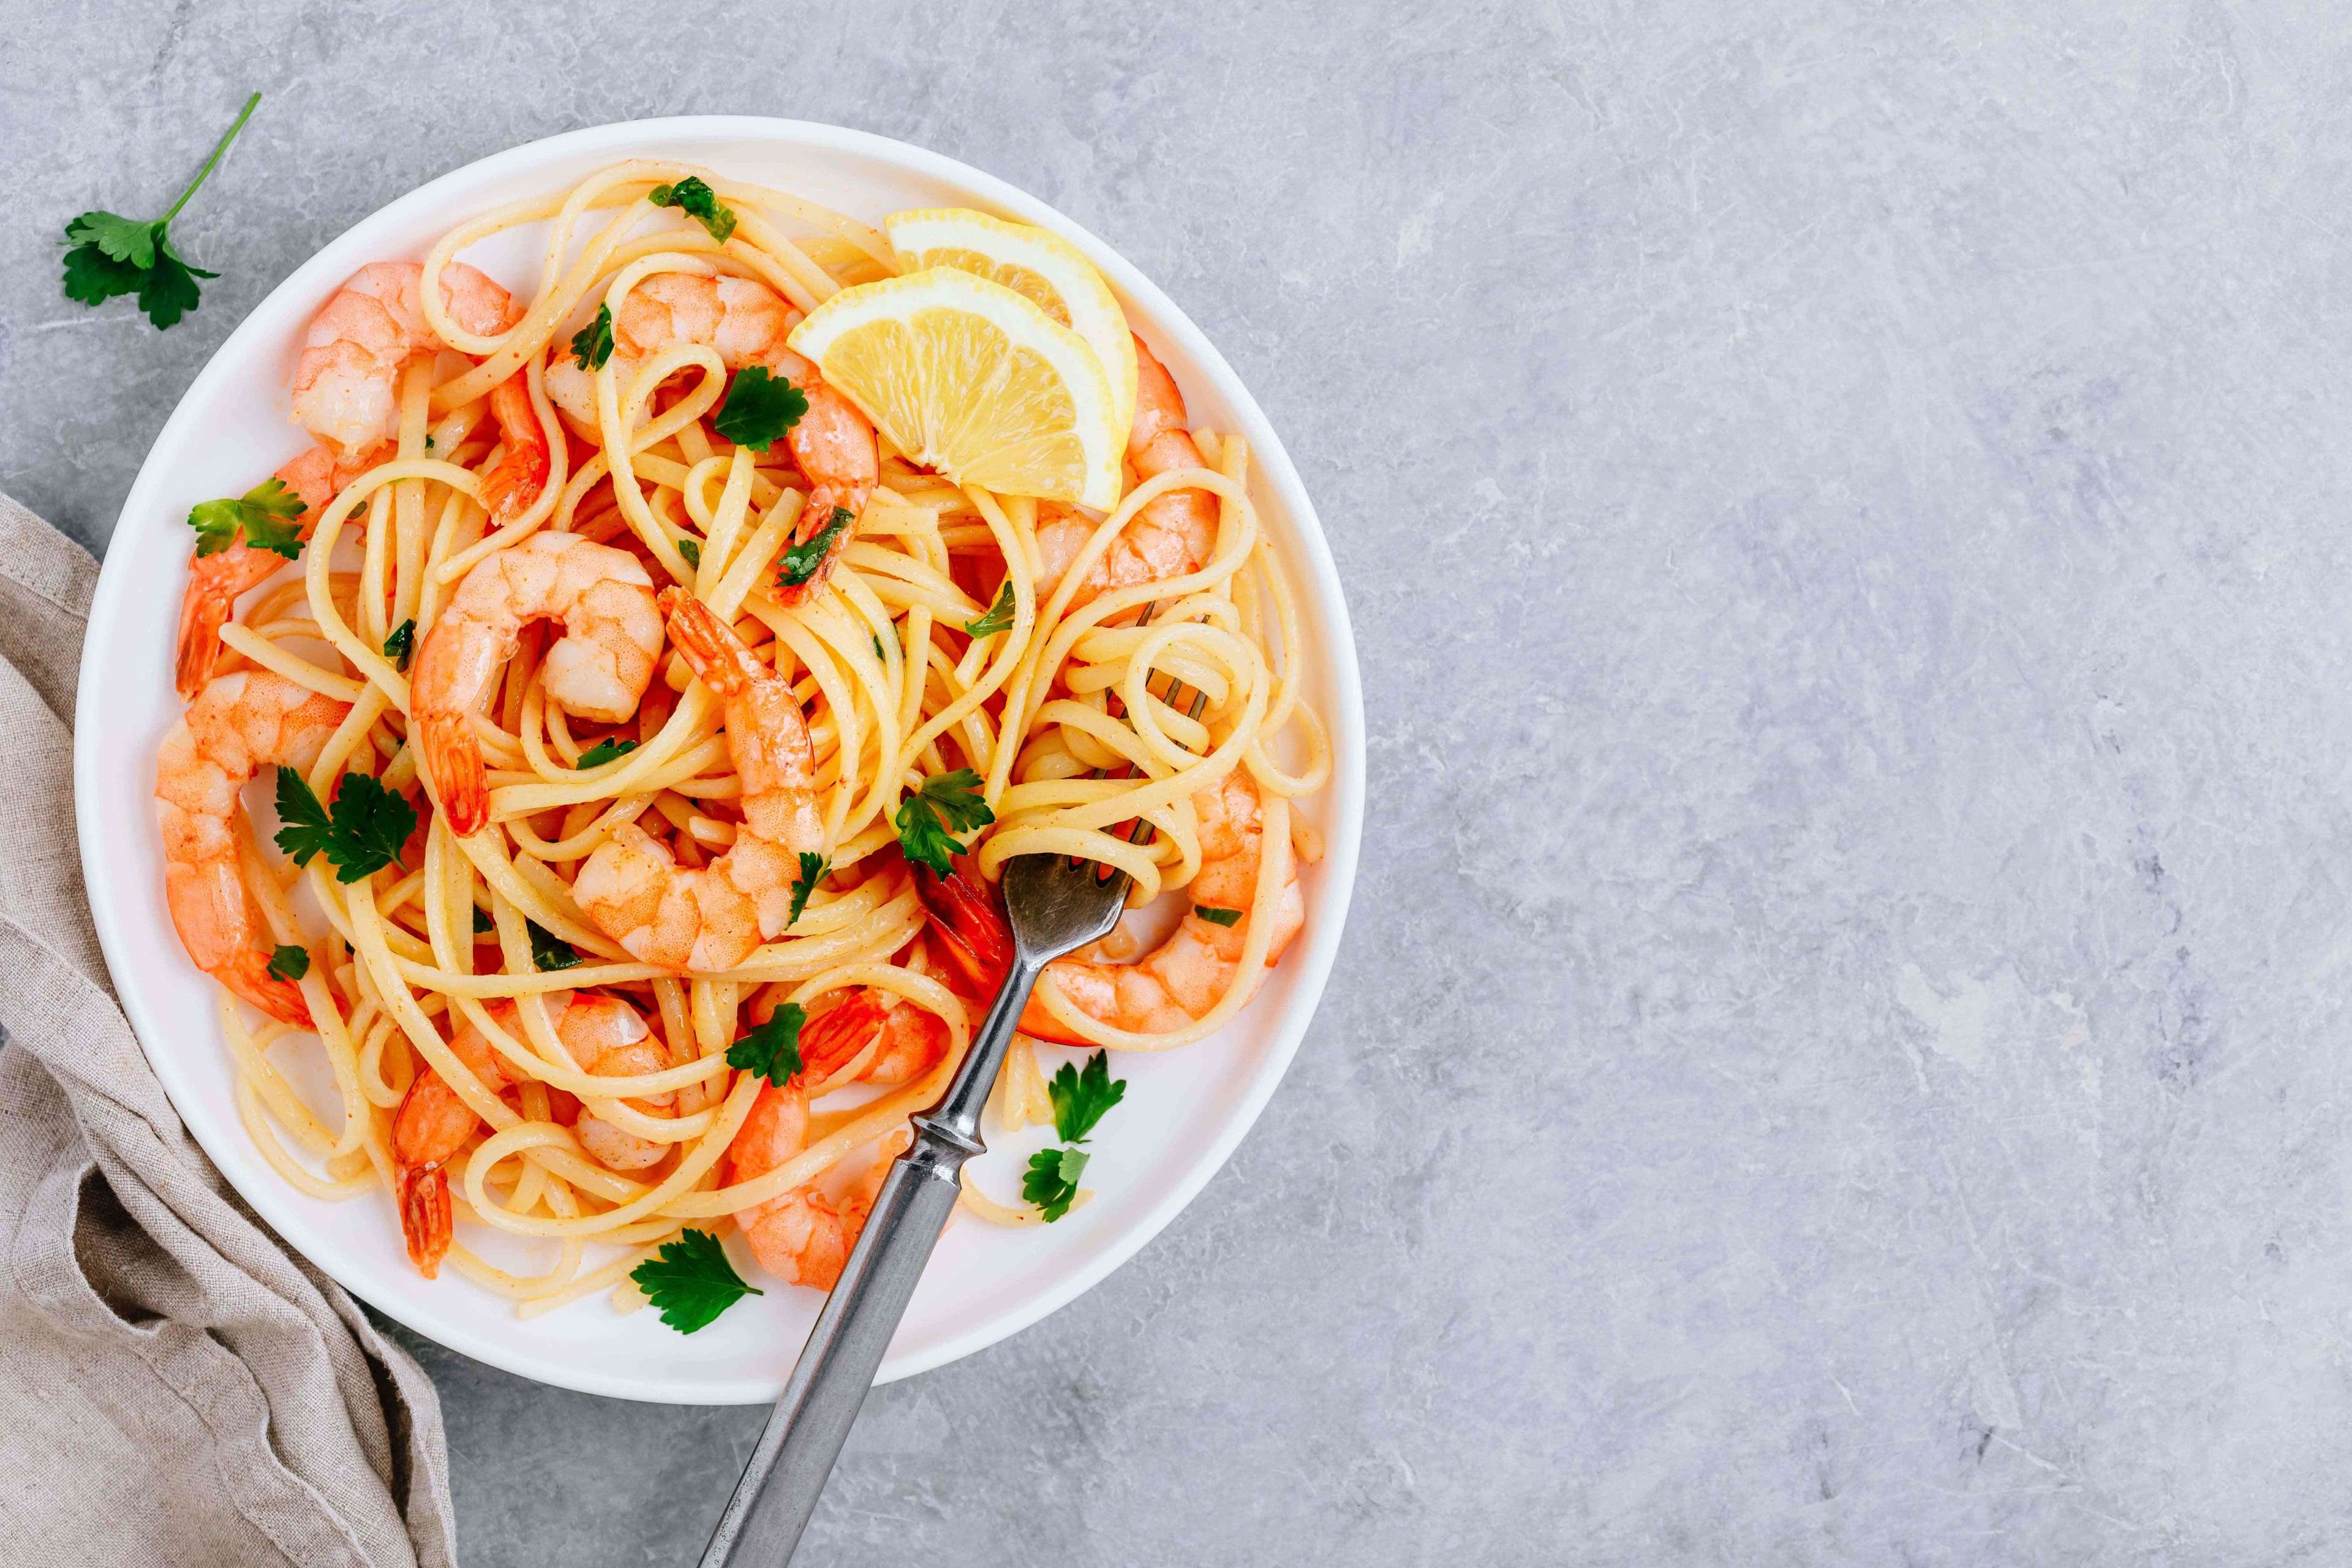 61bcbd41125a817827bd7efe_Seafood%20Pasta%20spaghetti%20with%20shrimps%20and%20parsley%20on%20gray%20stone%20background.jpeg